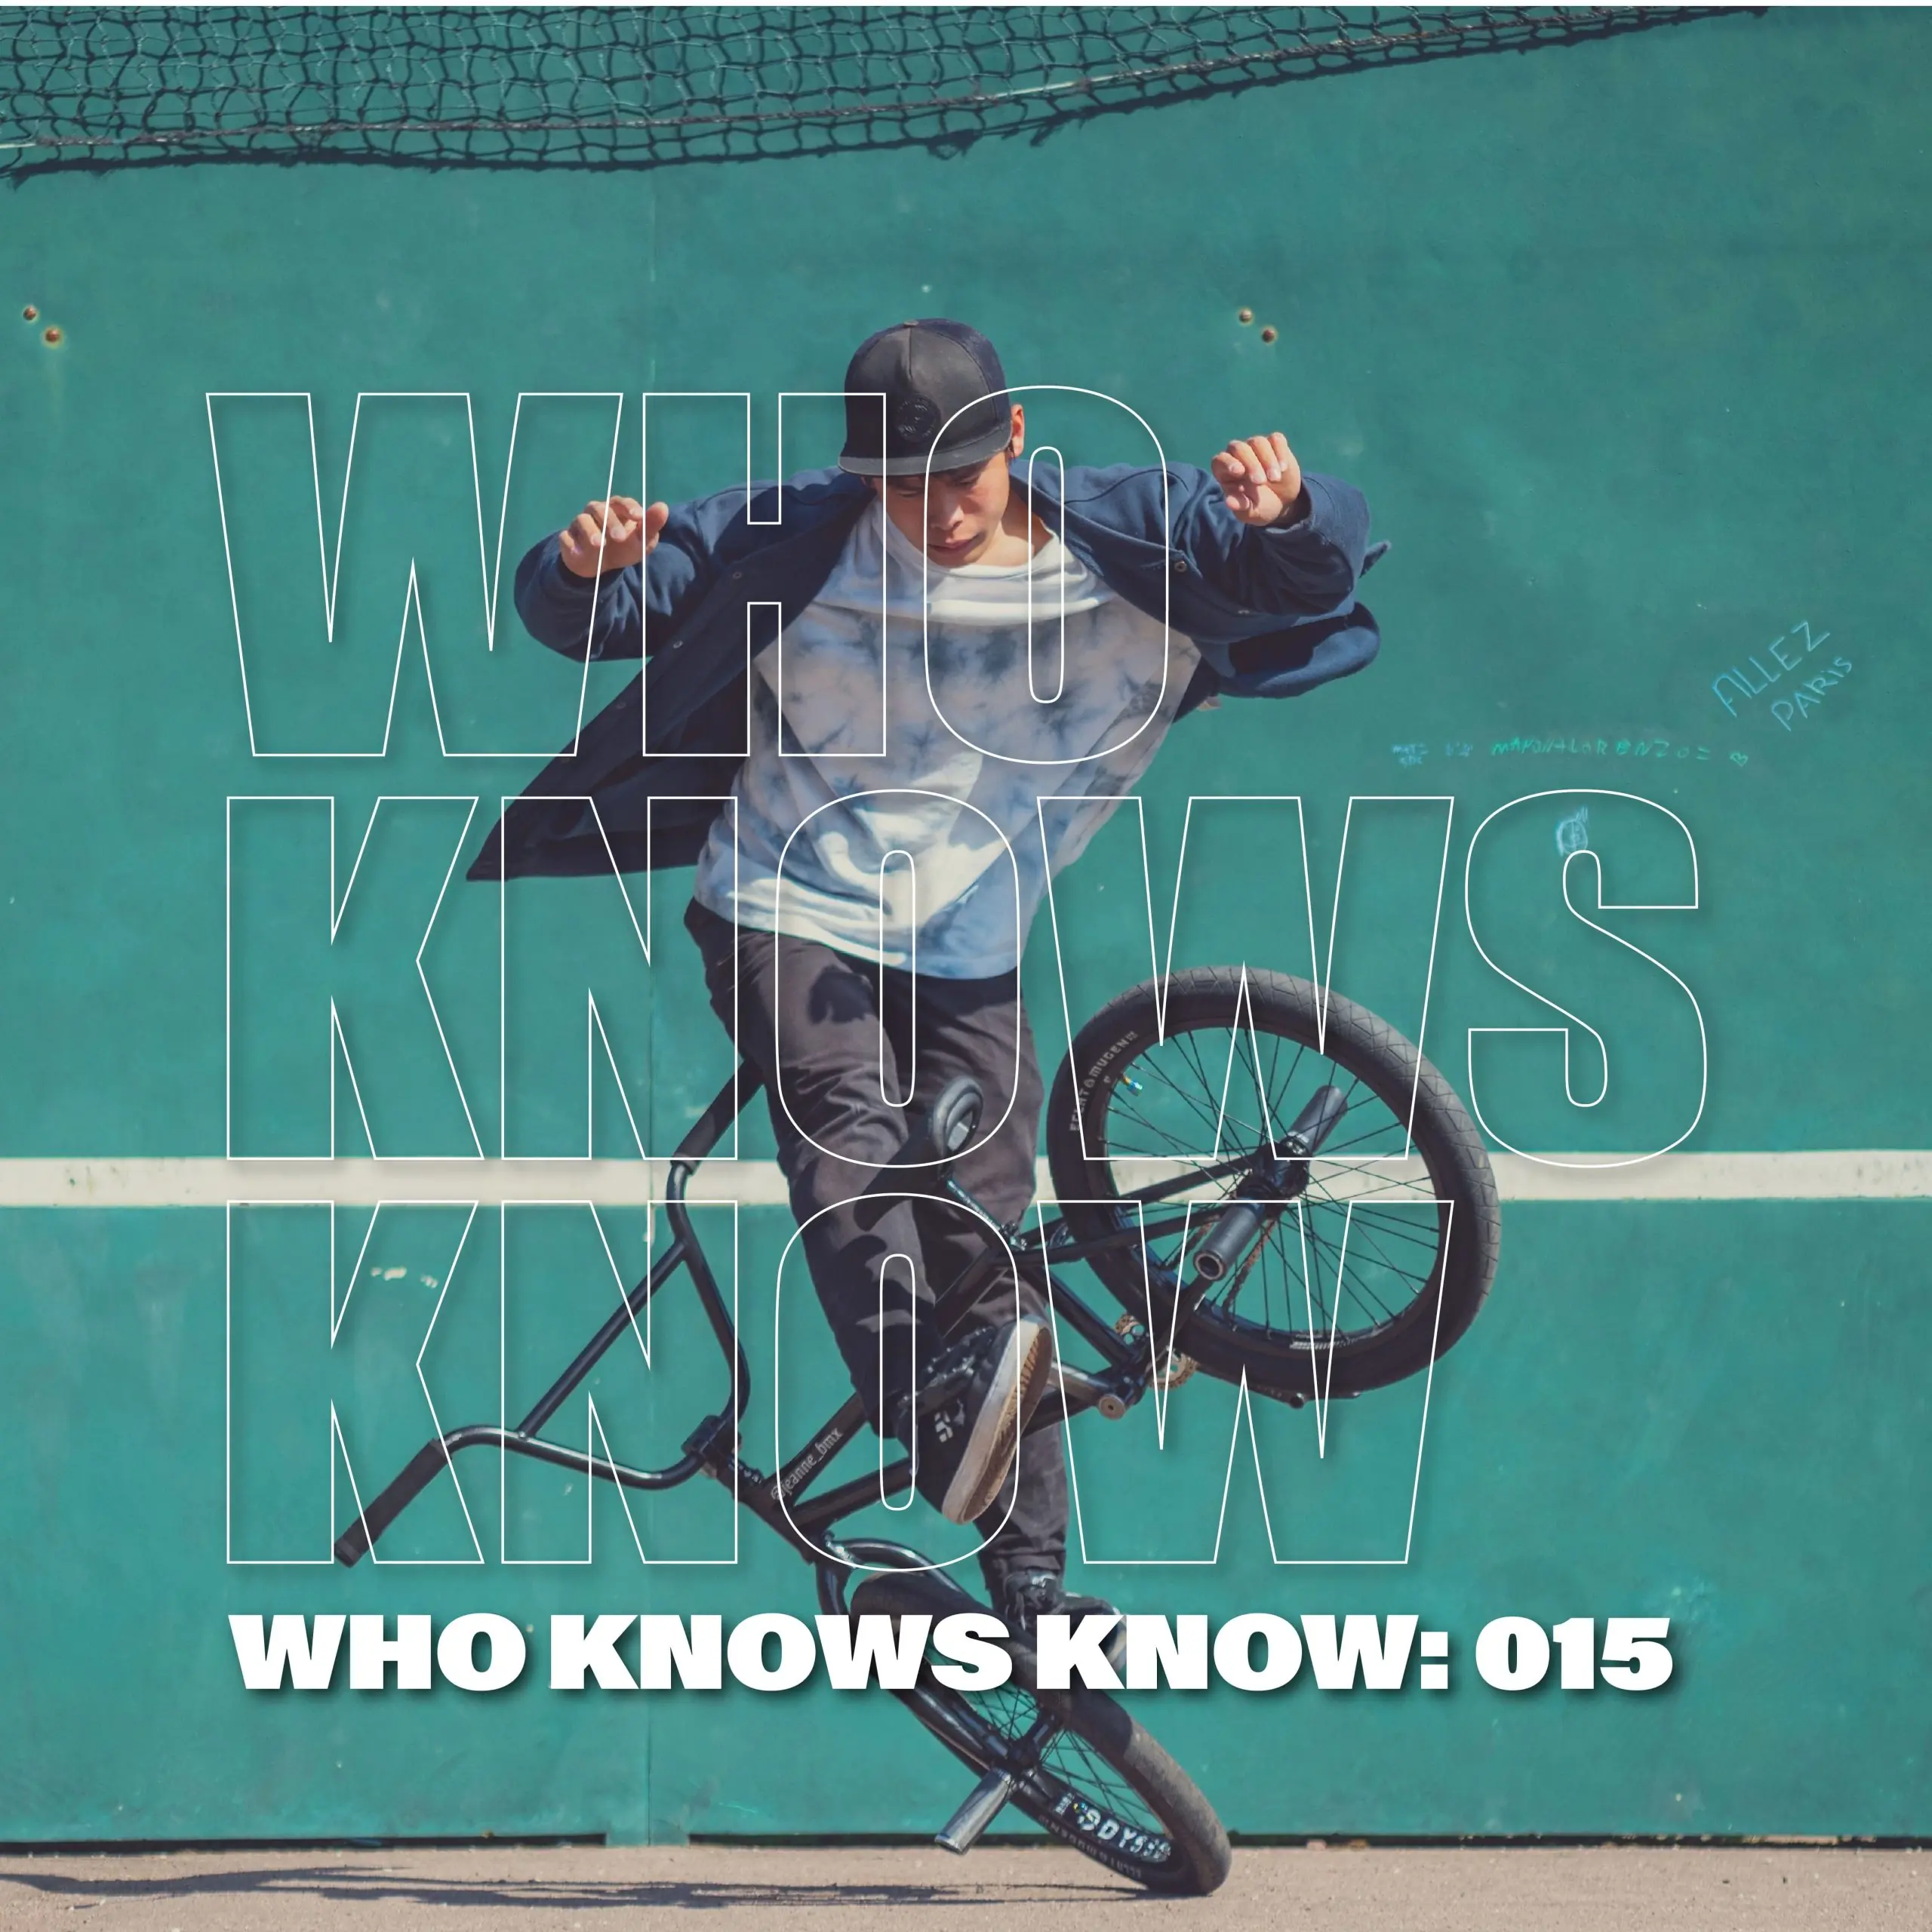 You are currently viewing WHO KNOWS KNOW: 015 KEIRYO KUDO